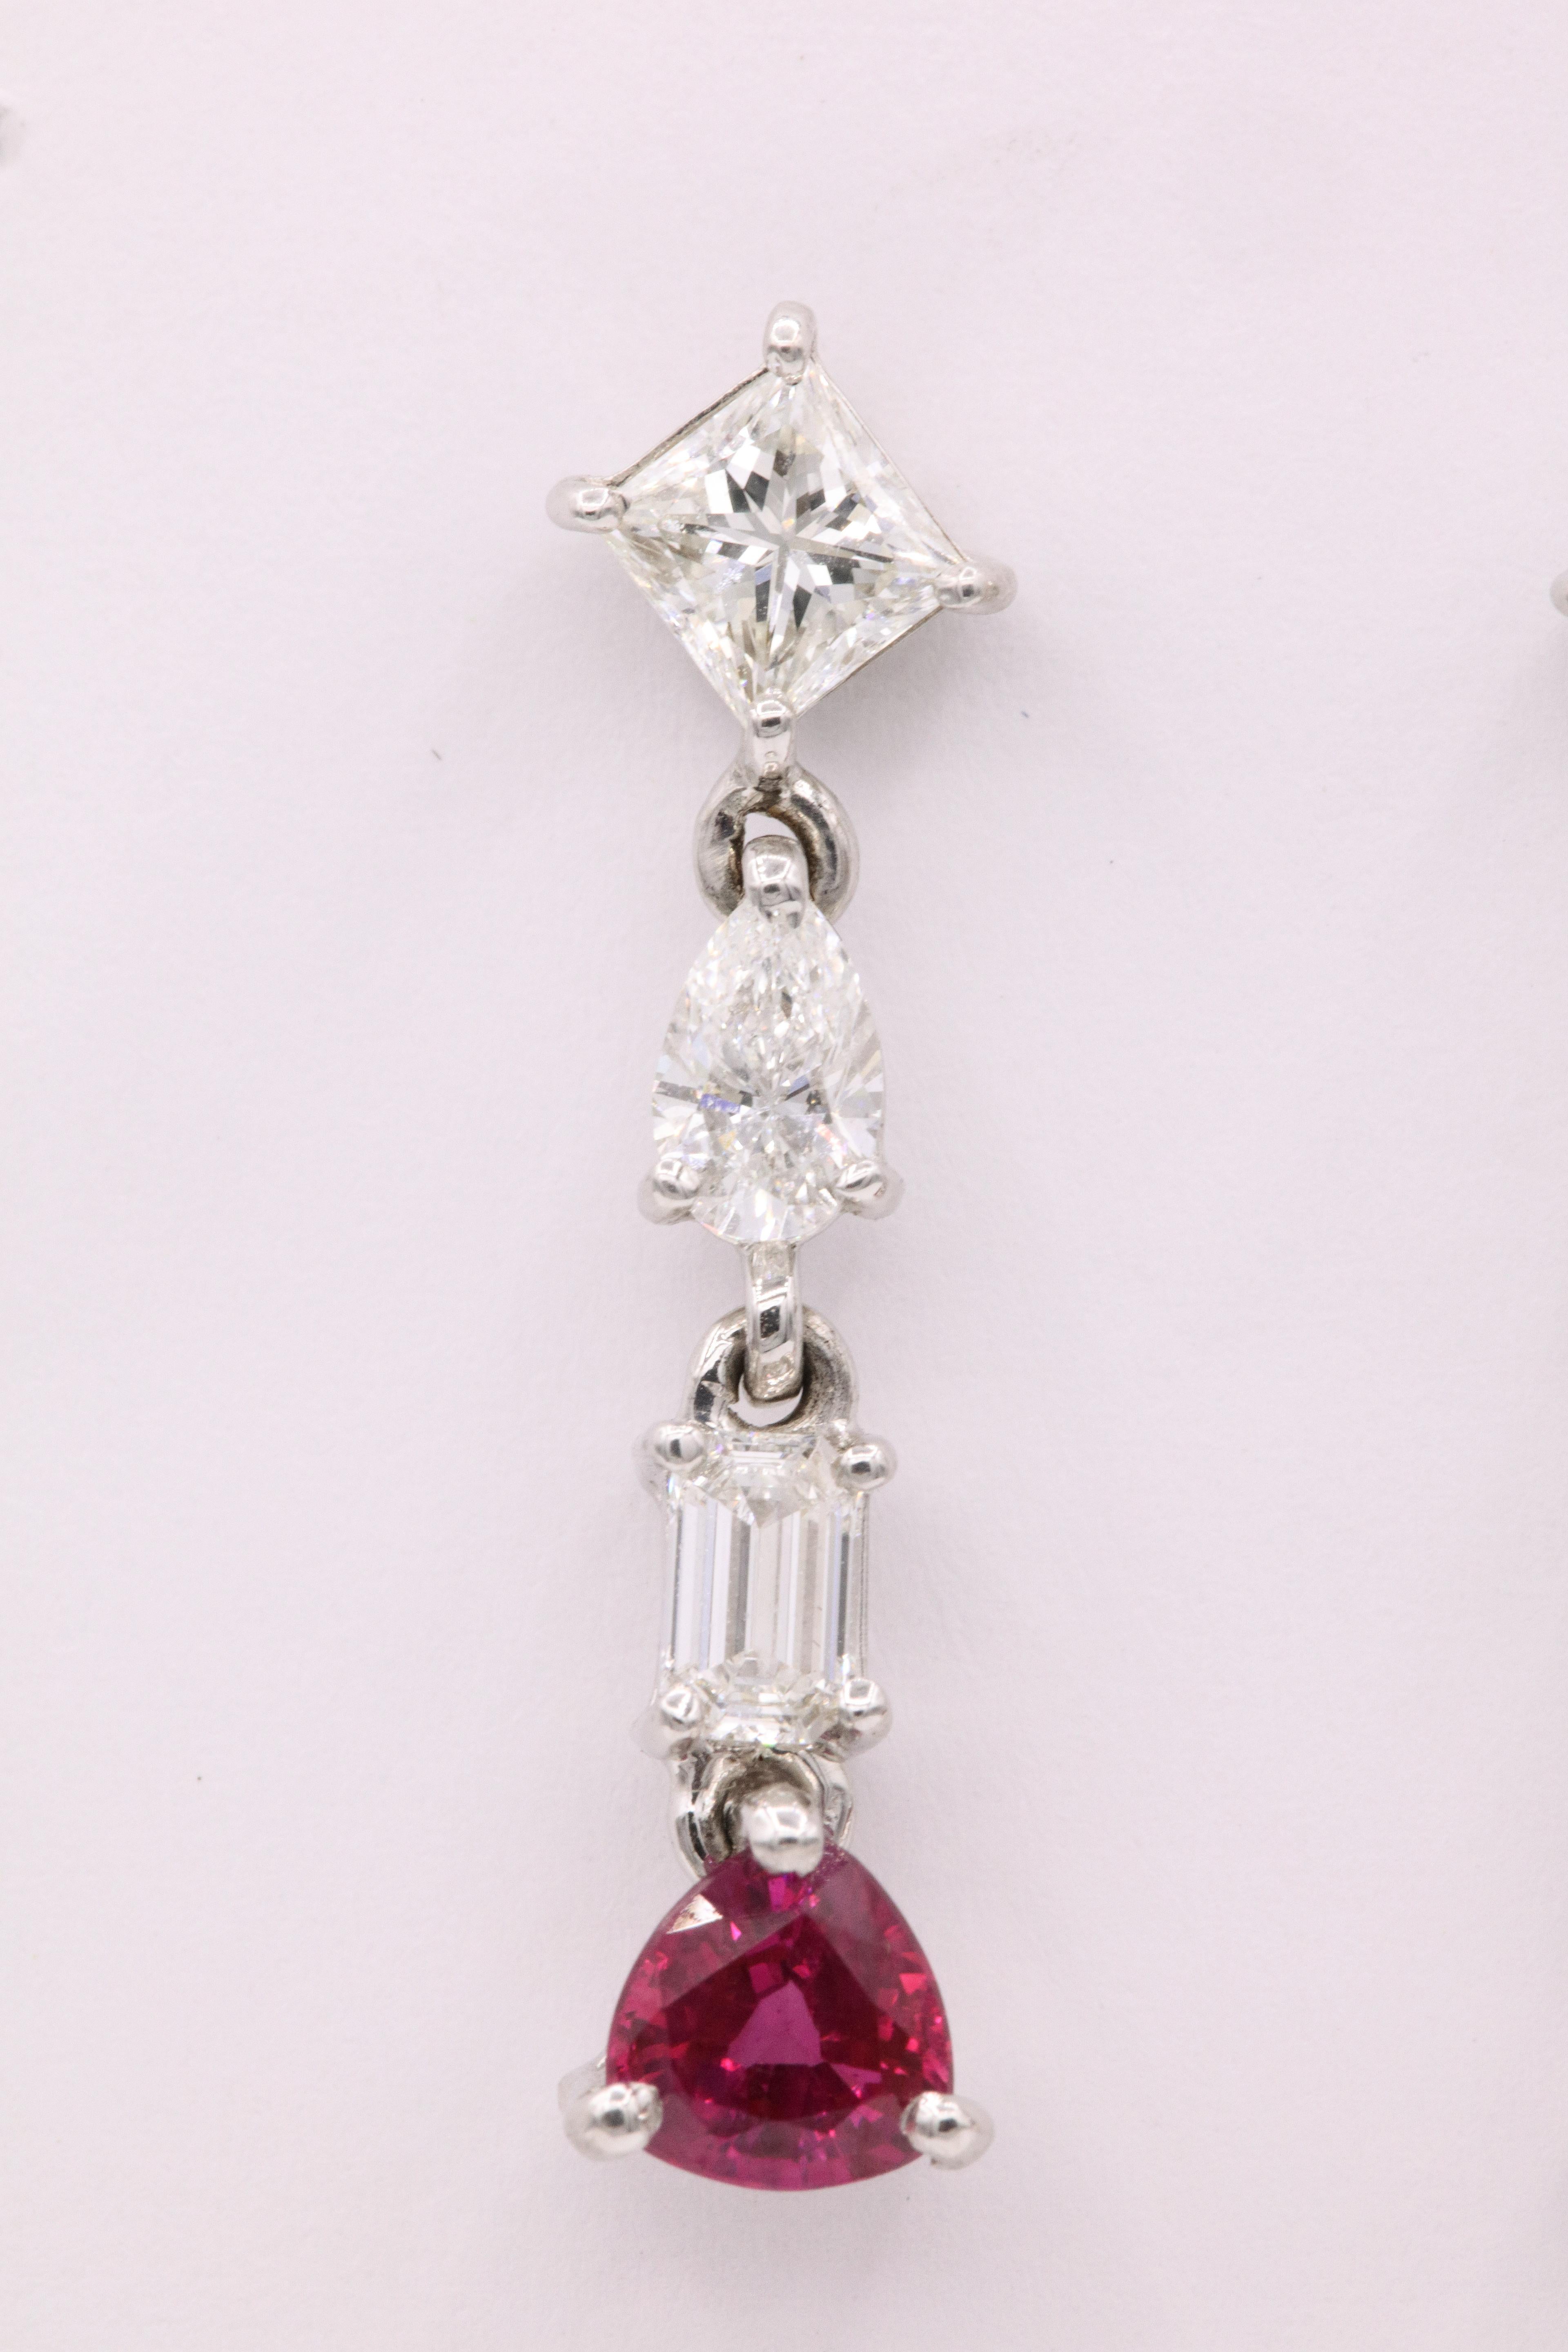 18K White gold drop earrings featuring two triangular Burma Rubies weighing 1.33 carats and three diamonds, princess, pear, and emerald cuts, weighing 2.20 carats. Elegant pair of earrings!
Color G-H
Clarity VS-SI
GIA Certified 